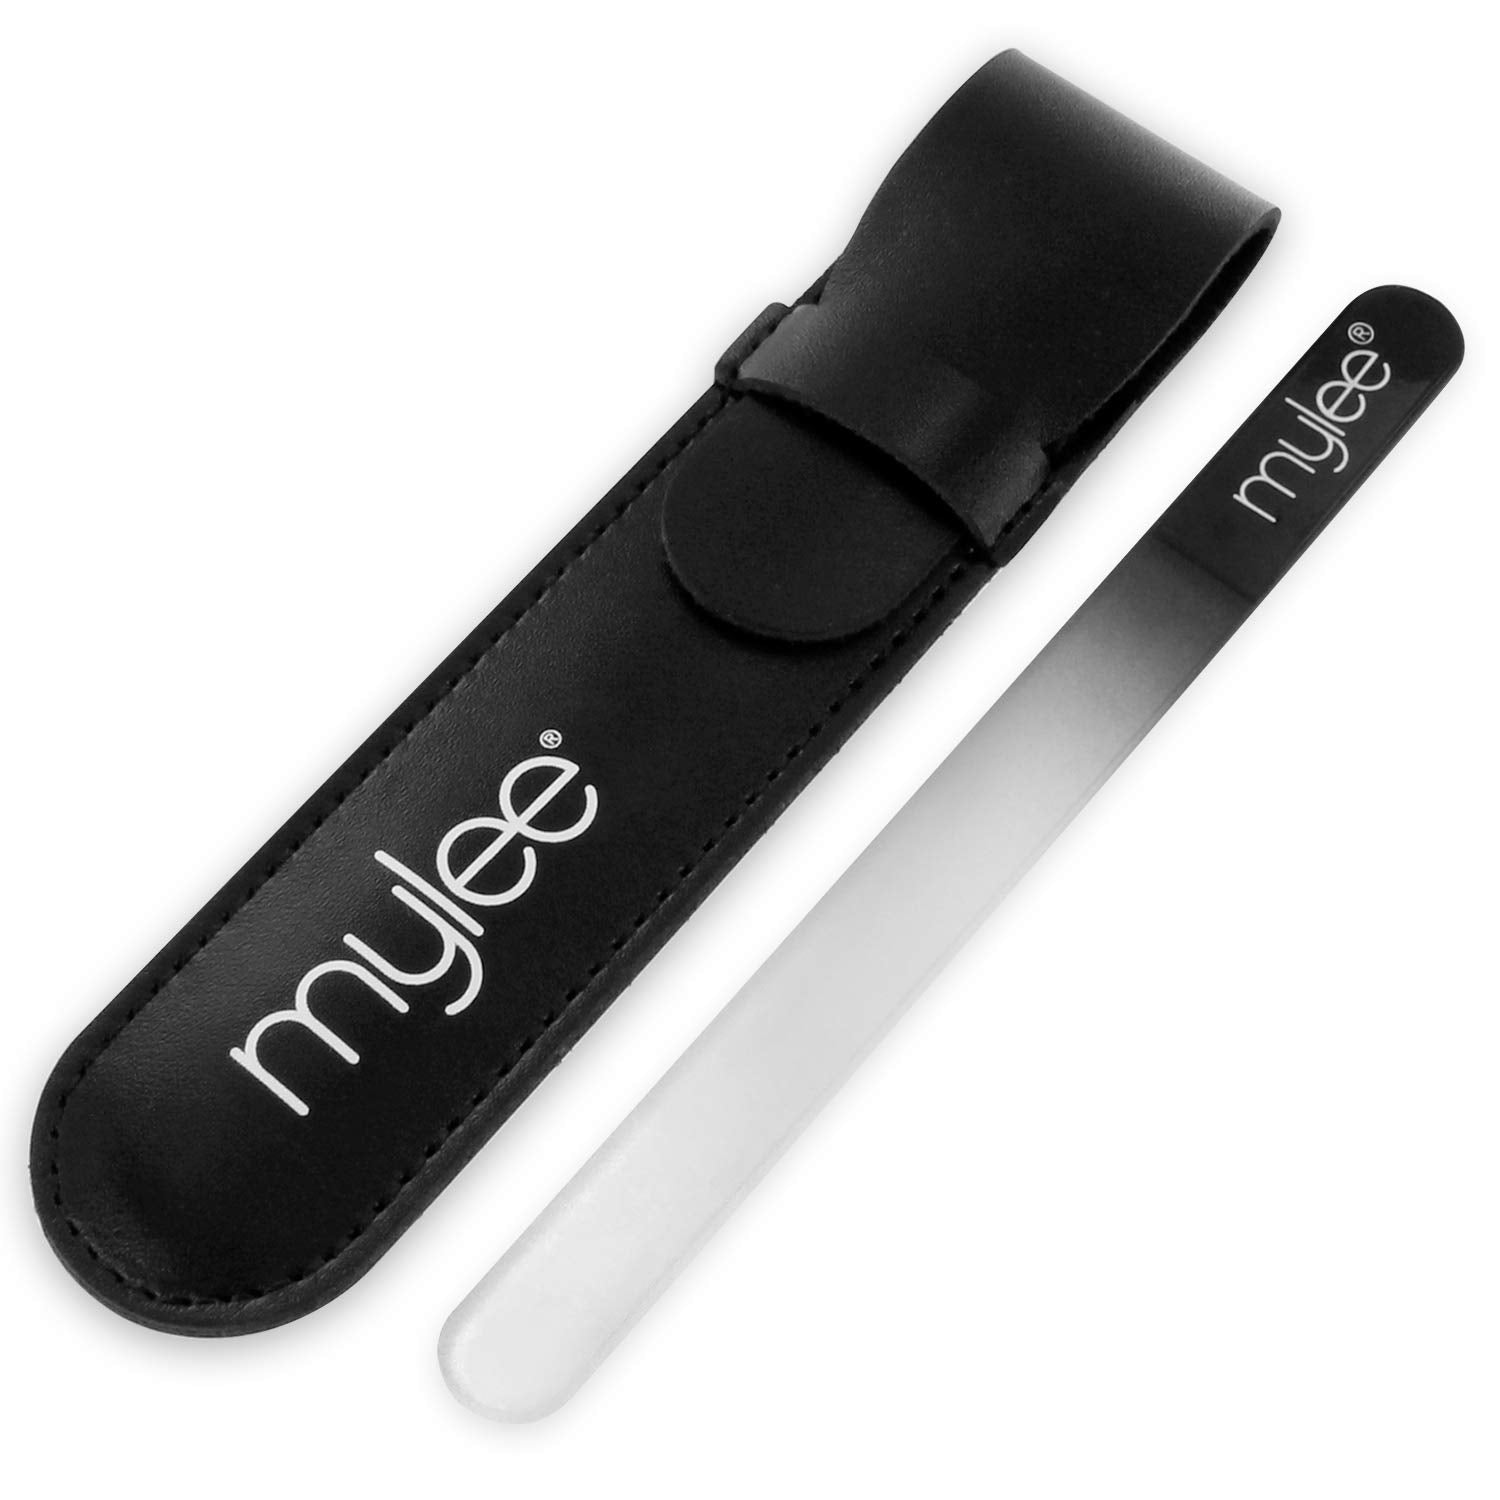 Mylee Crystal Nail File with Case – Hygienic and Long Lasting Professional Manicure with 5 Year Guarantee, for Salon and Home Use